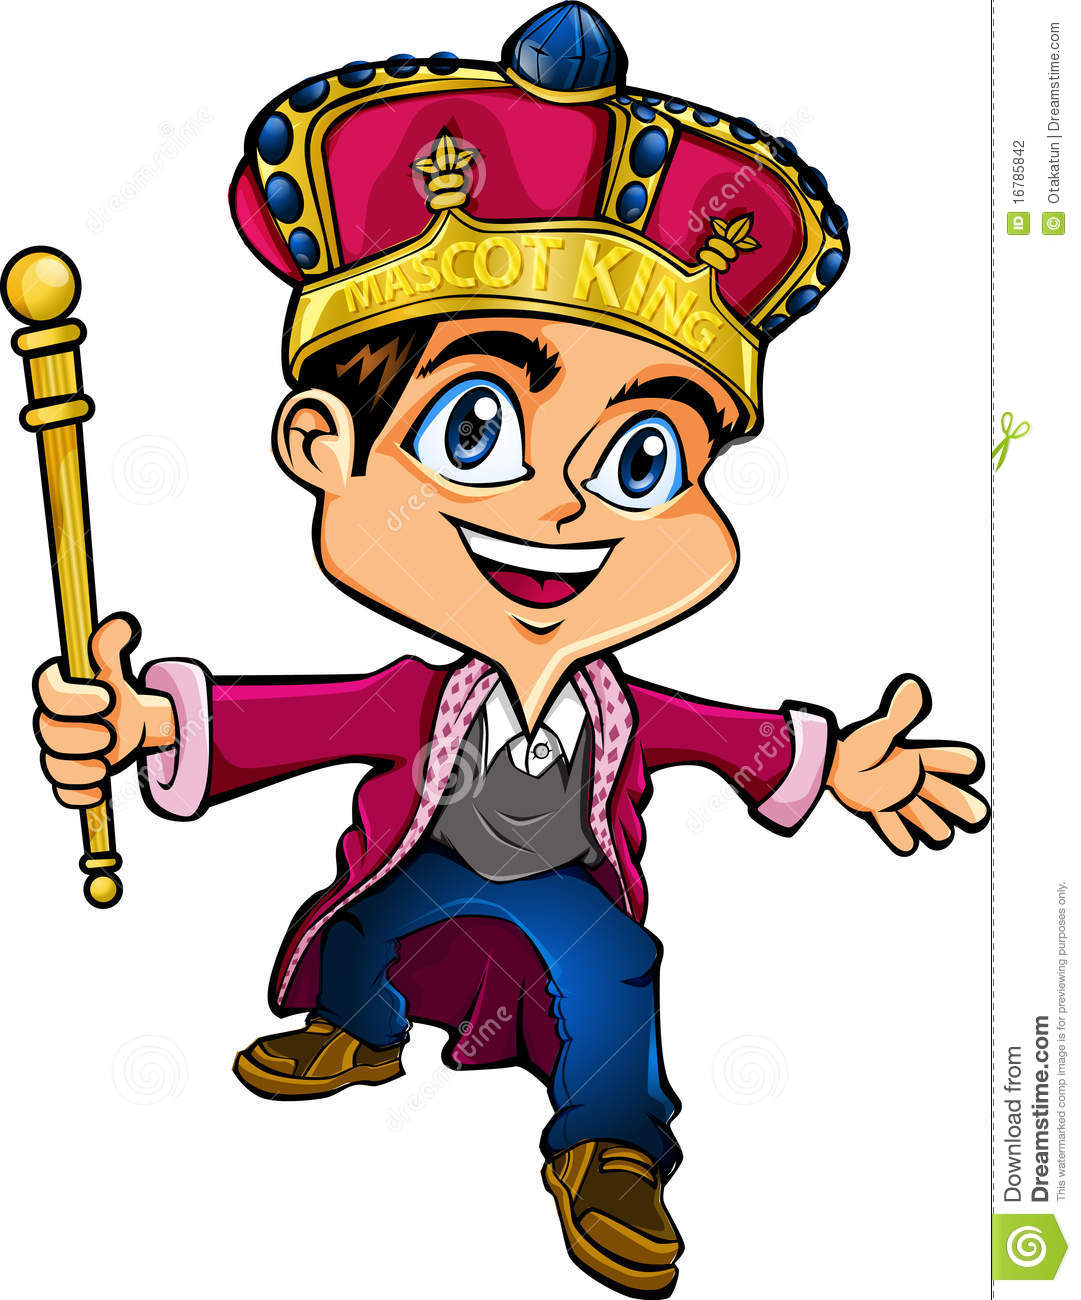 Clipart Of King.